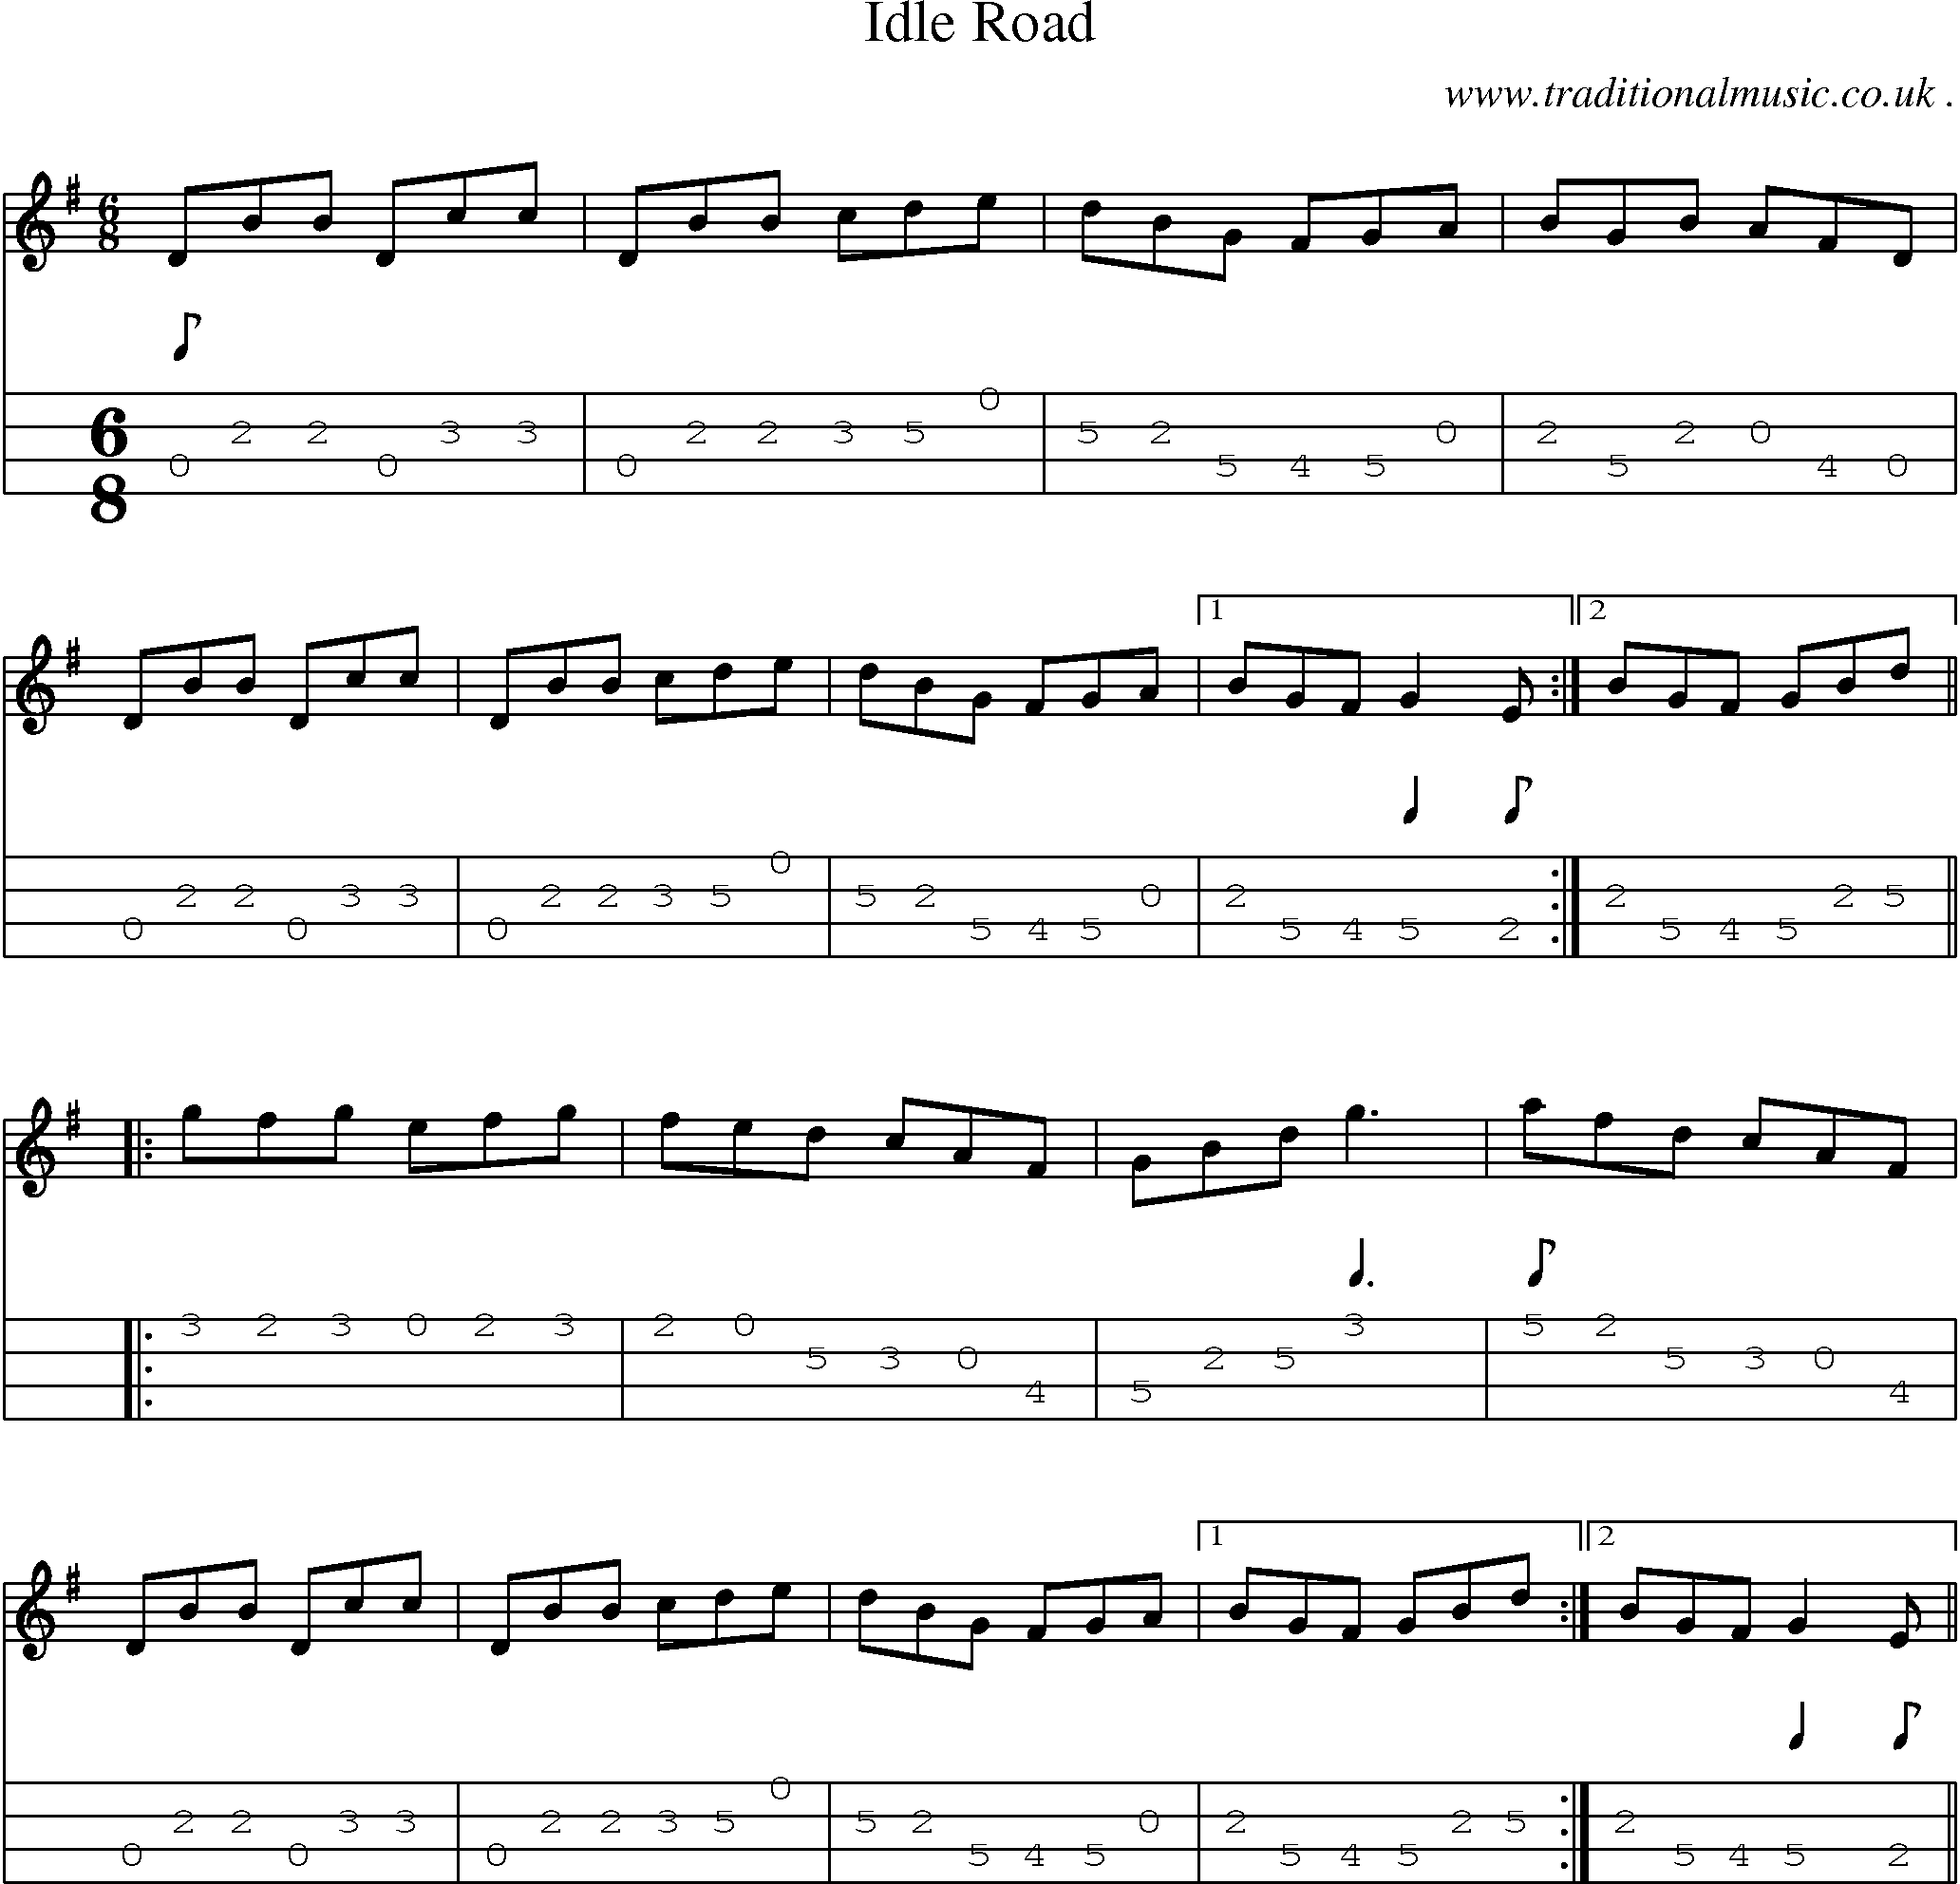 Sheet-Music and Mandolin Tabs for Idle Road